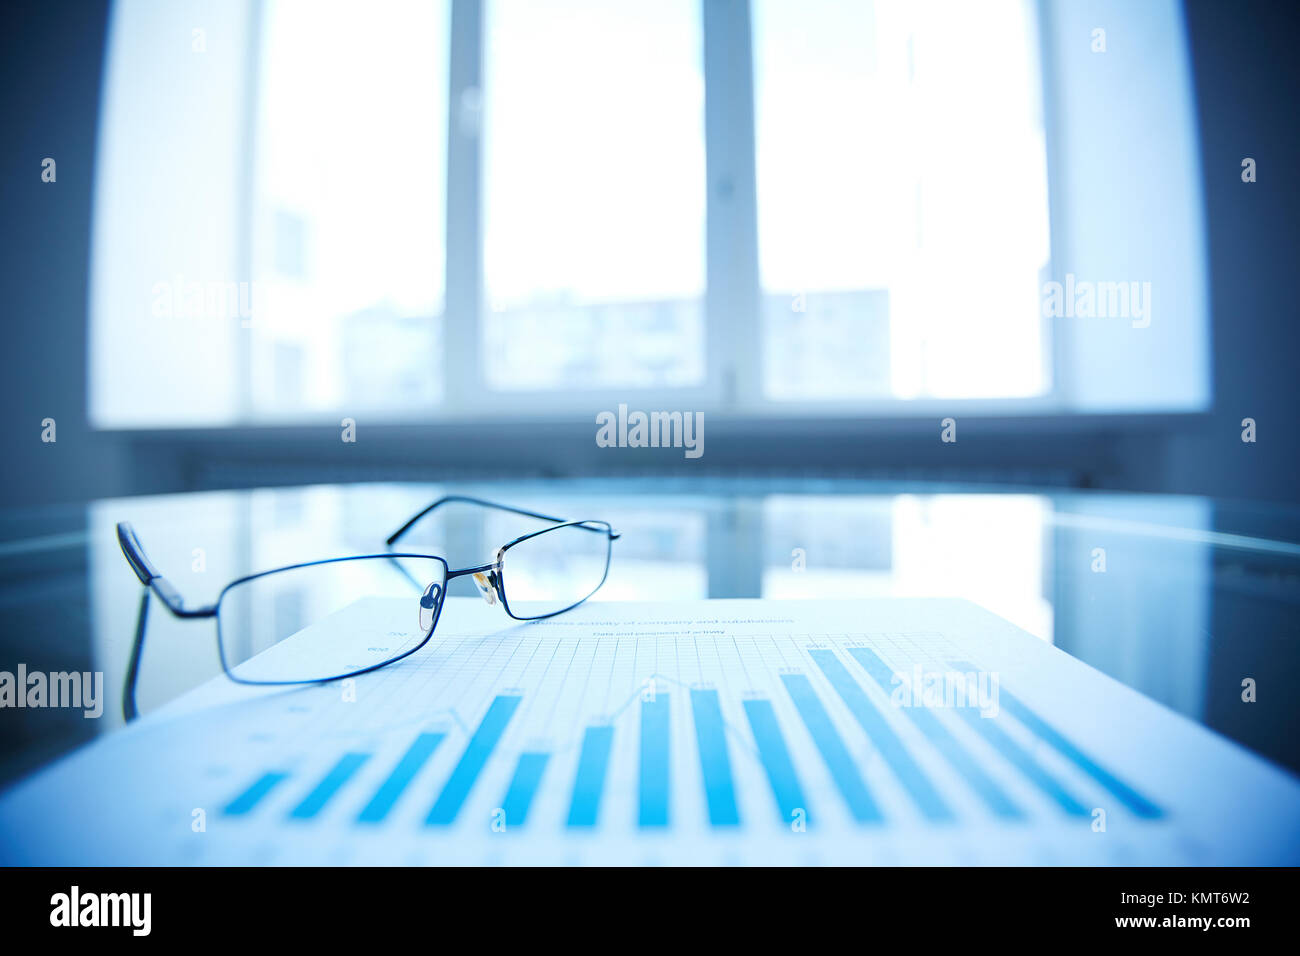 Image of eyeglasses and document on workplace Stock Photo